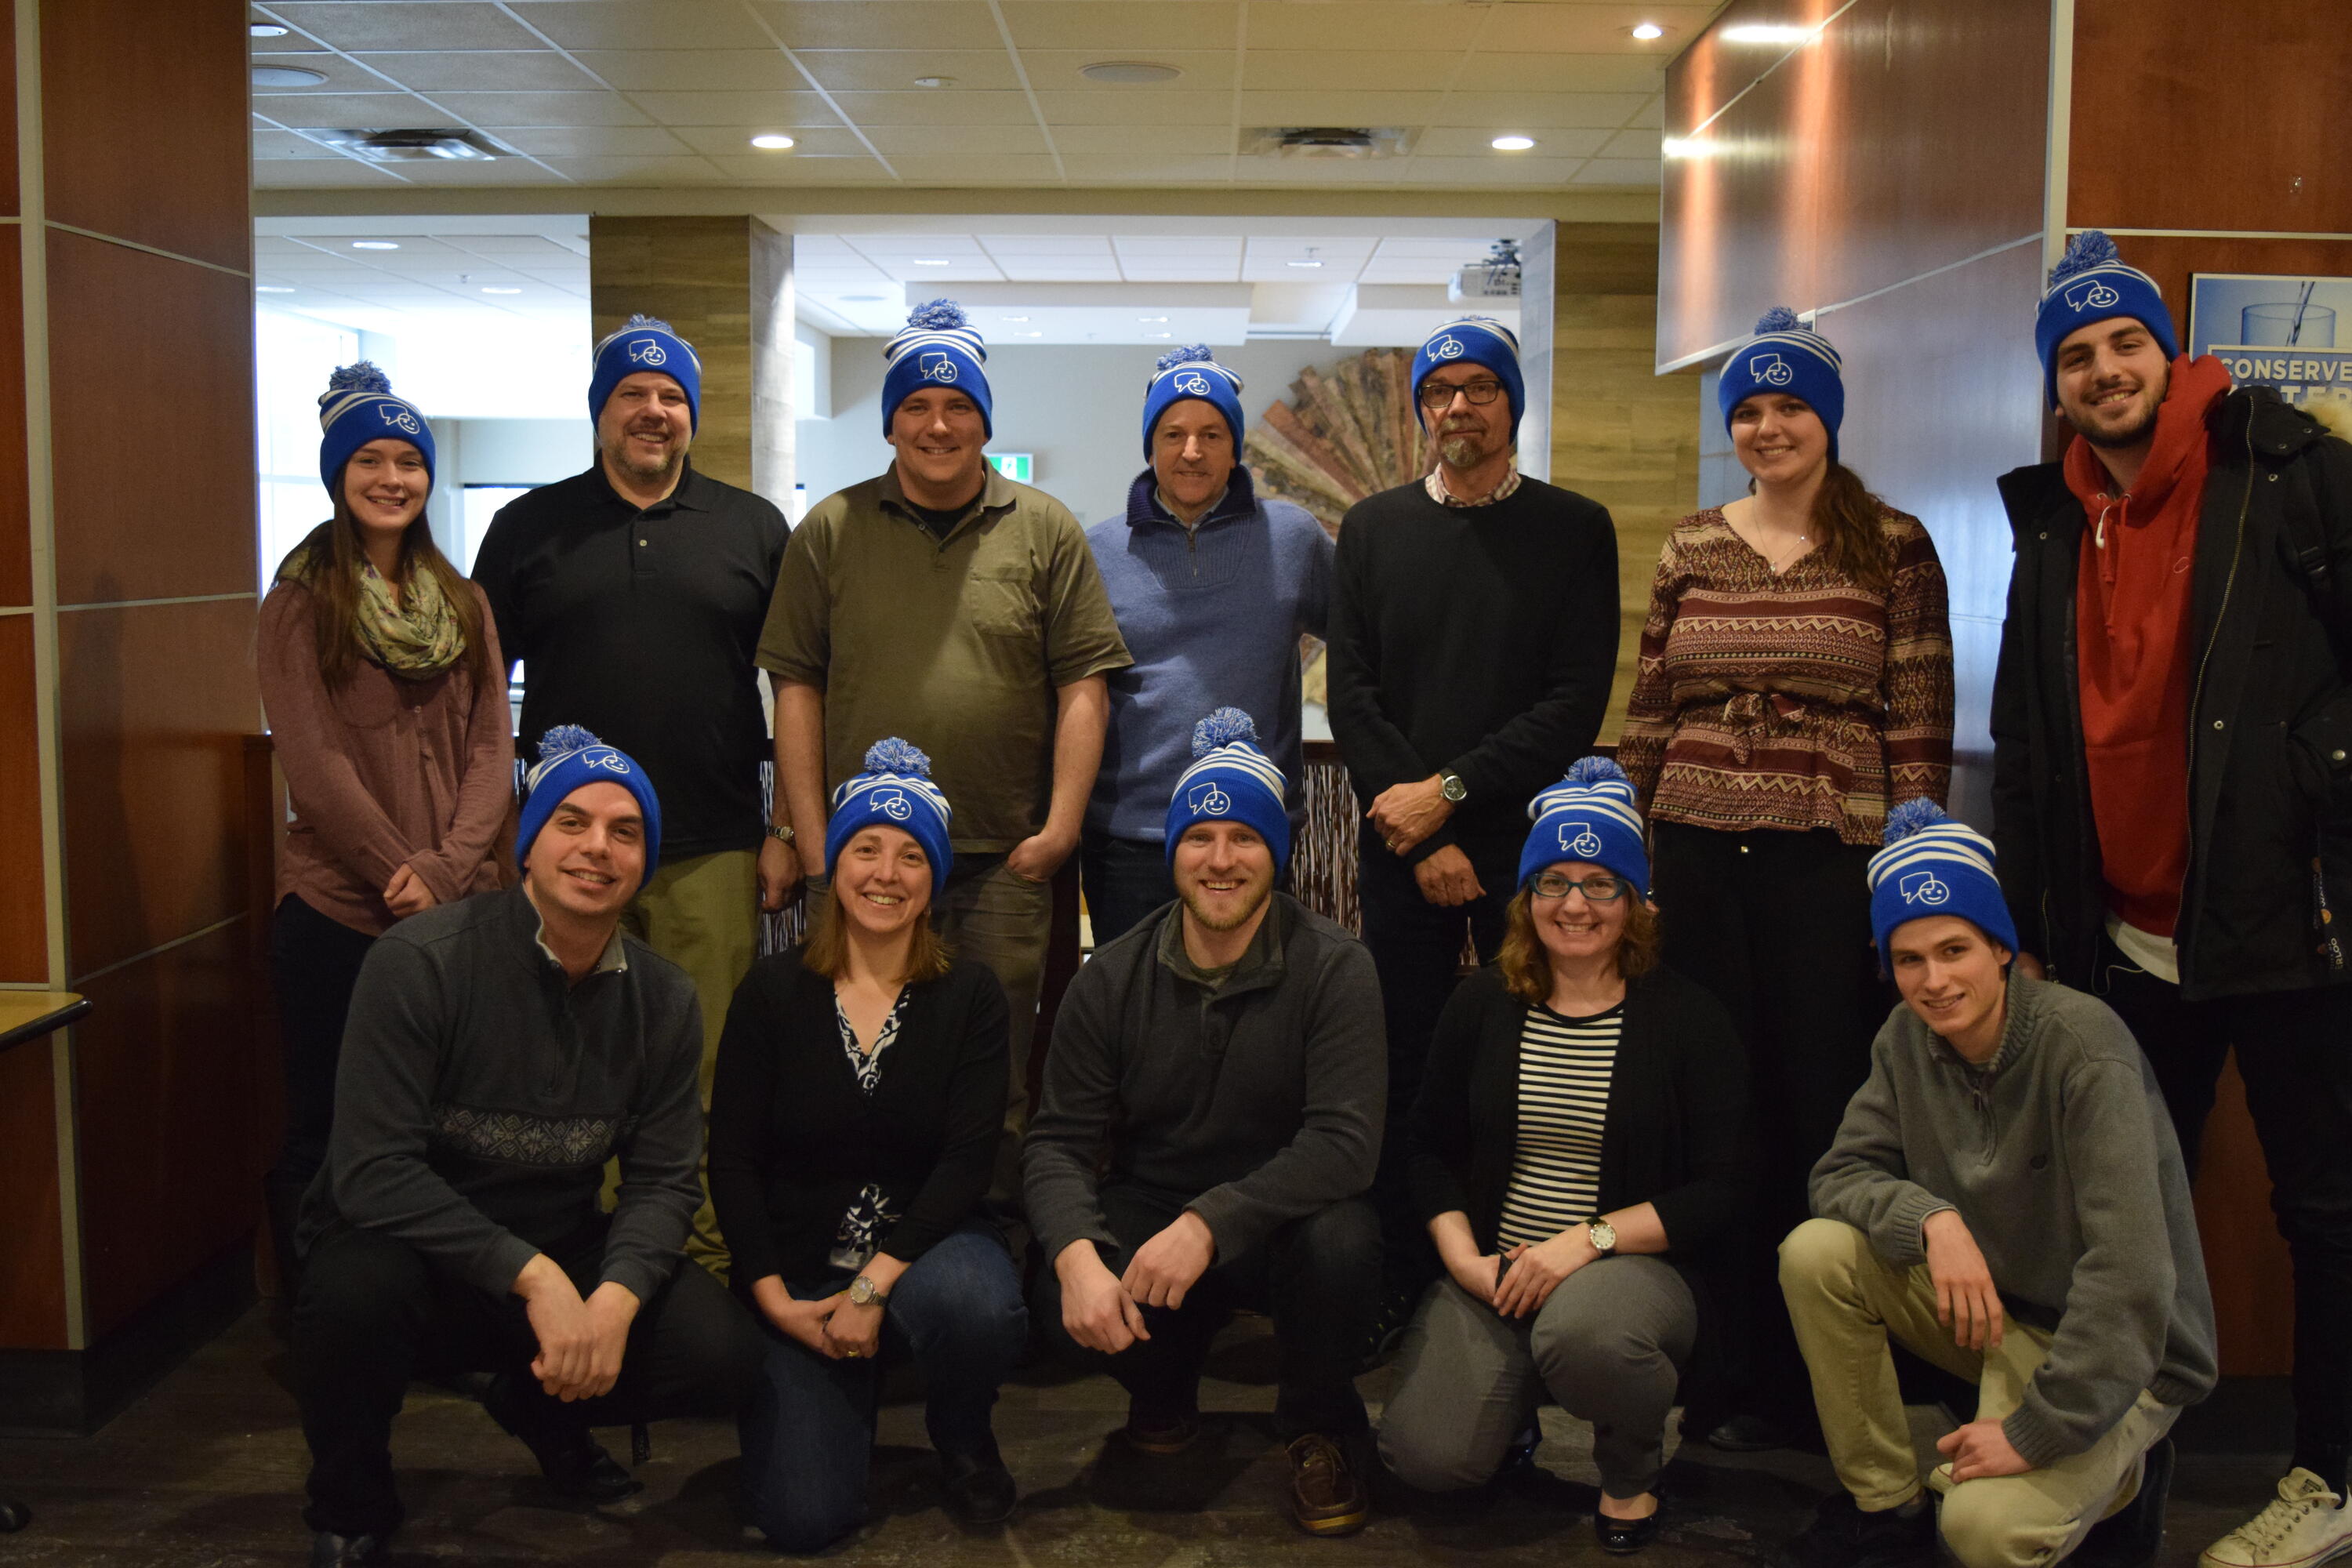 St. Paul's staff and faculty wearing hats for Bell Let's Talk Day 